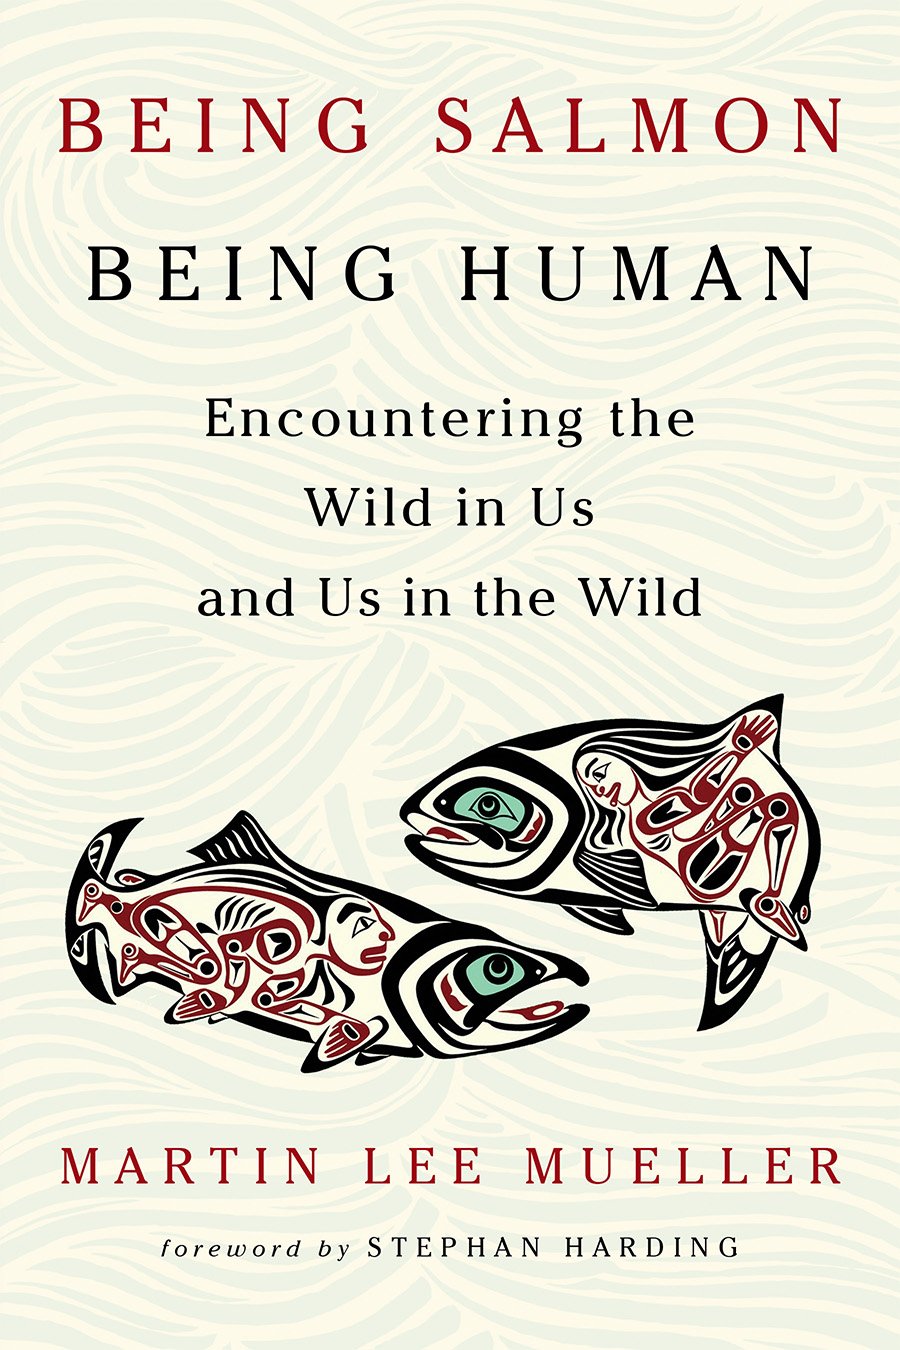 Being Salmon, Being Human: Encountering the Wild in Us and Us in the Wild [Book]